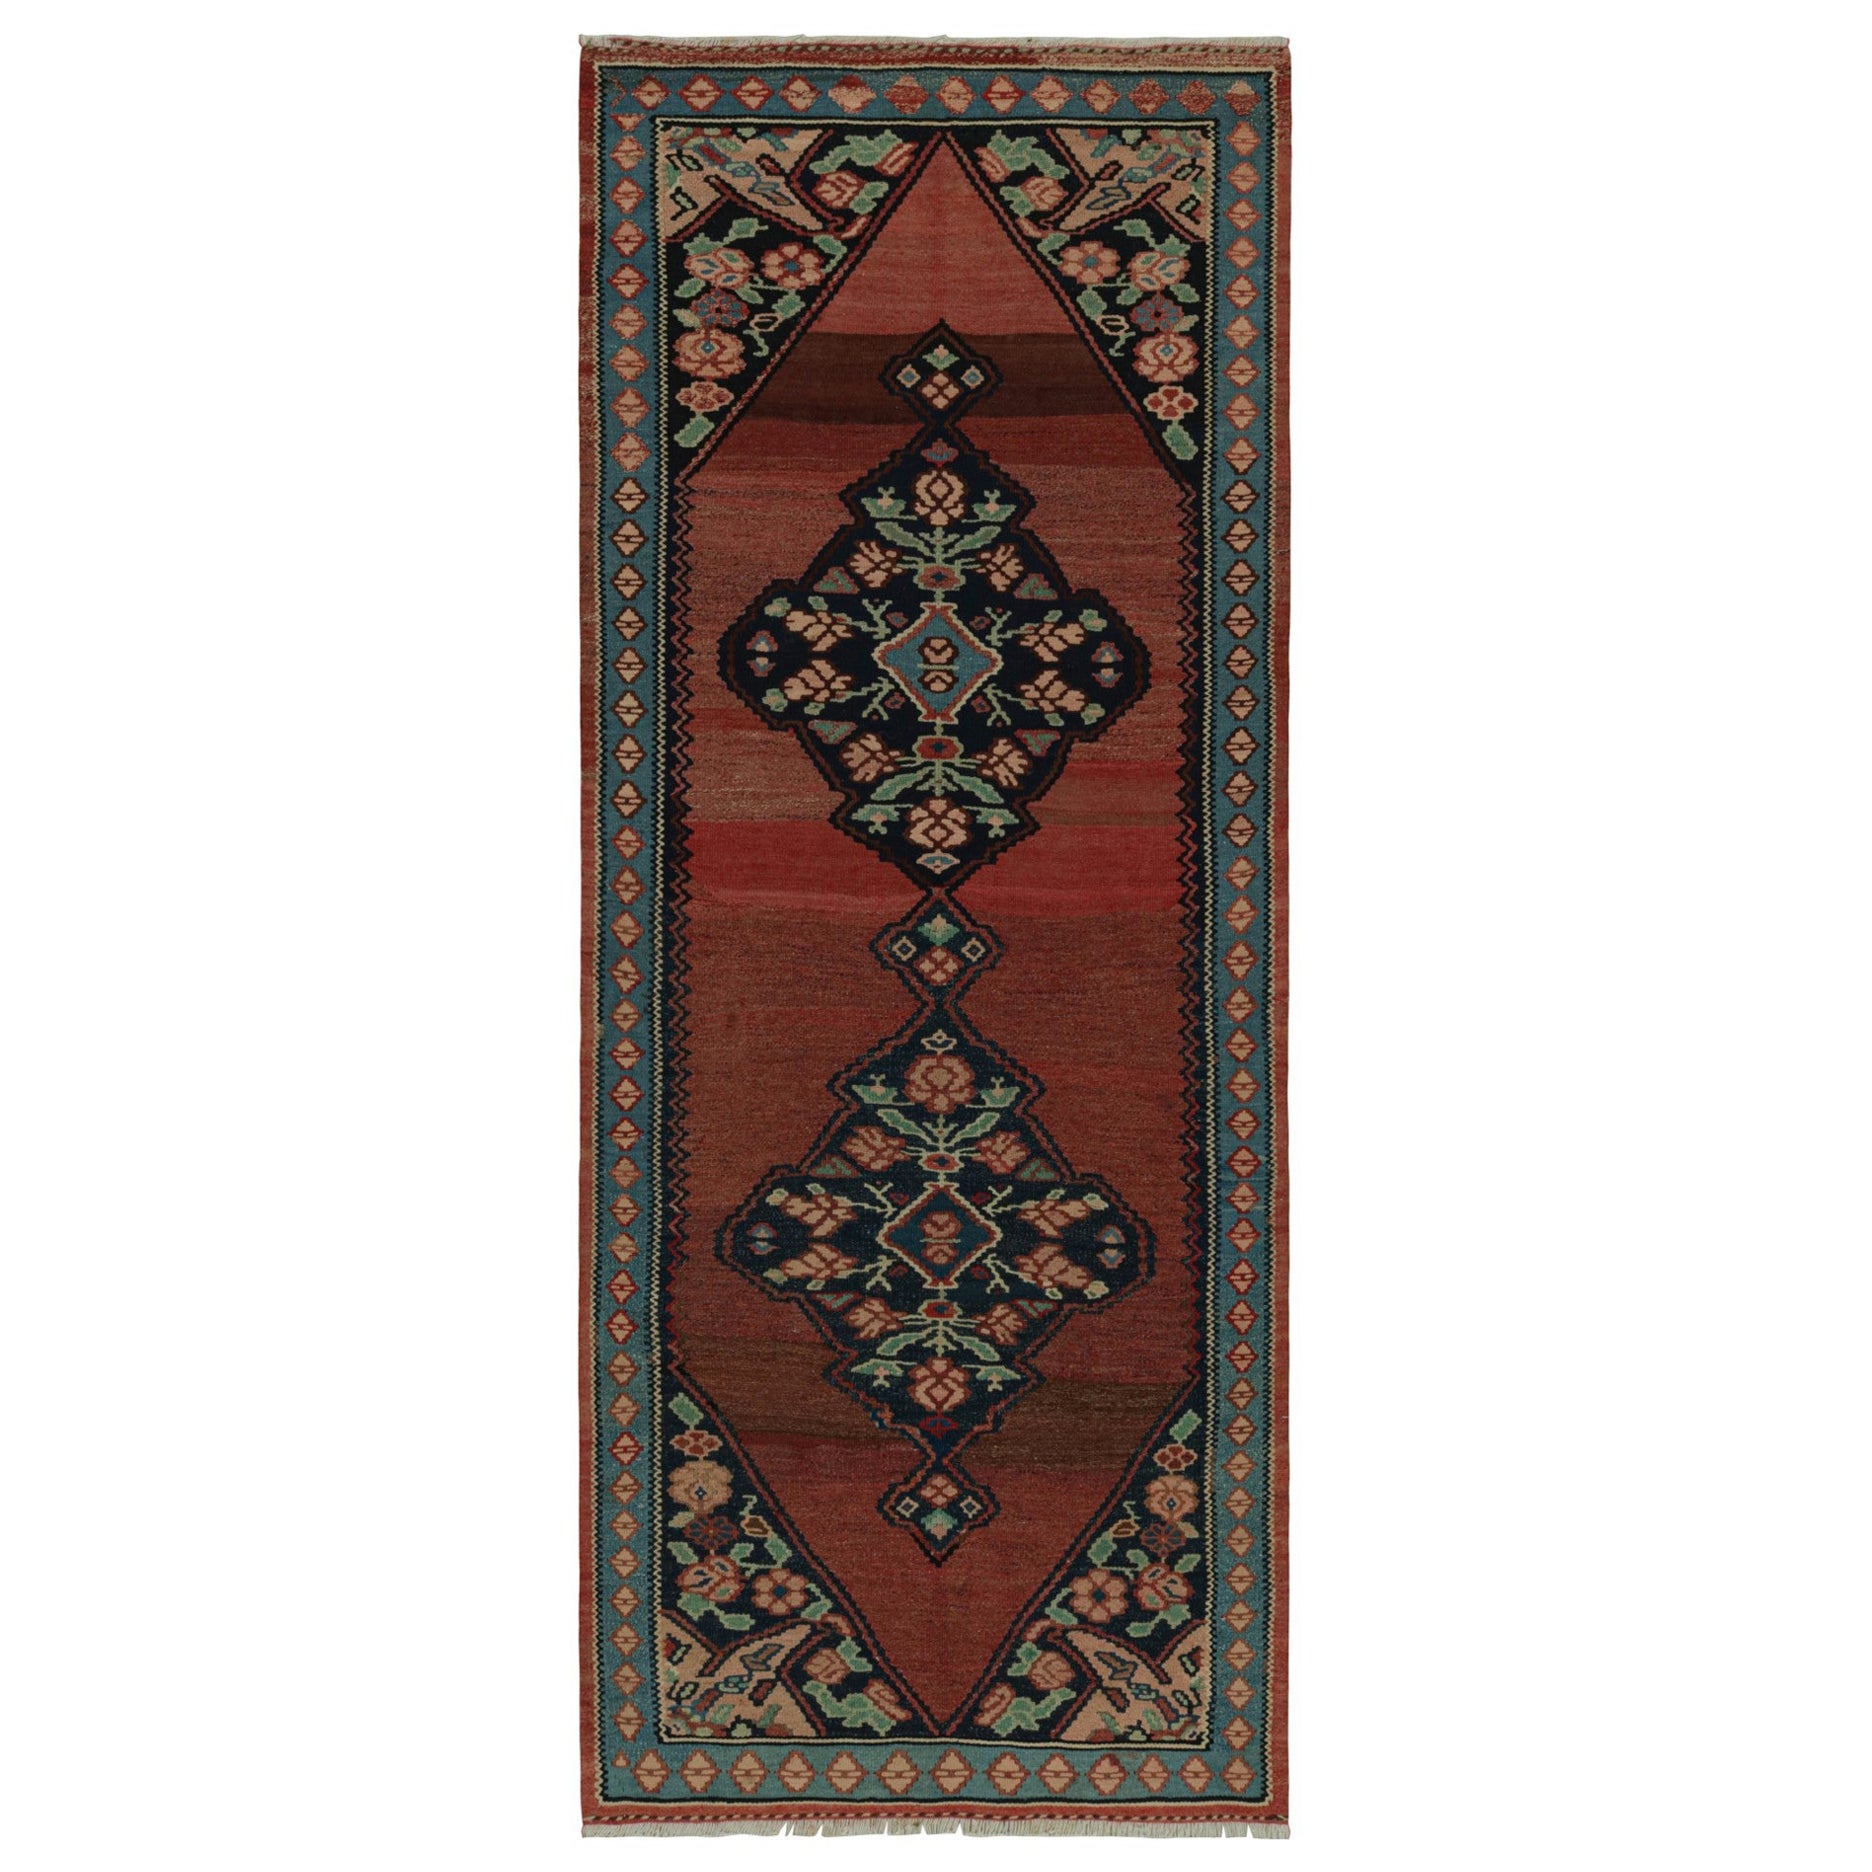 Rug & Kilim’s Afghan Tribal Kilim with Medallions and Geometric Floral Patterns